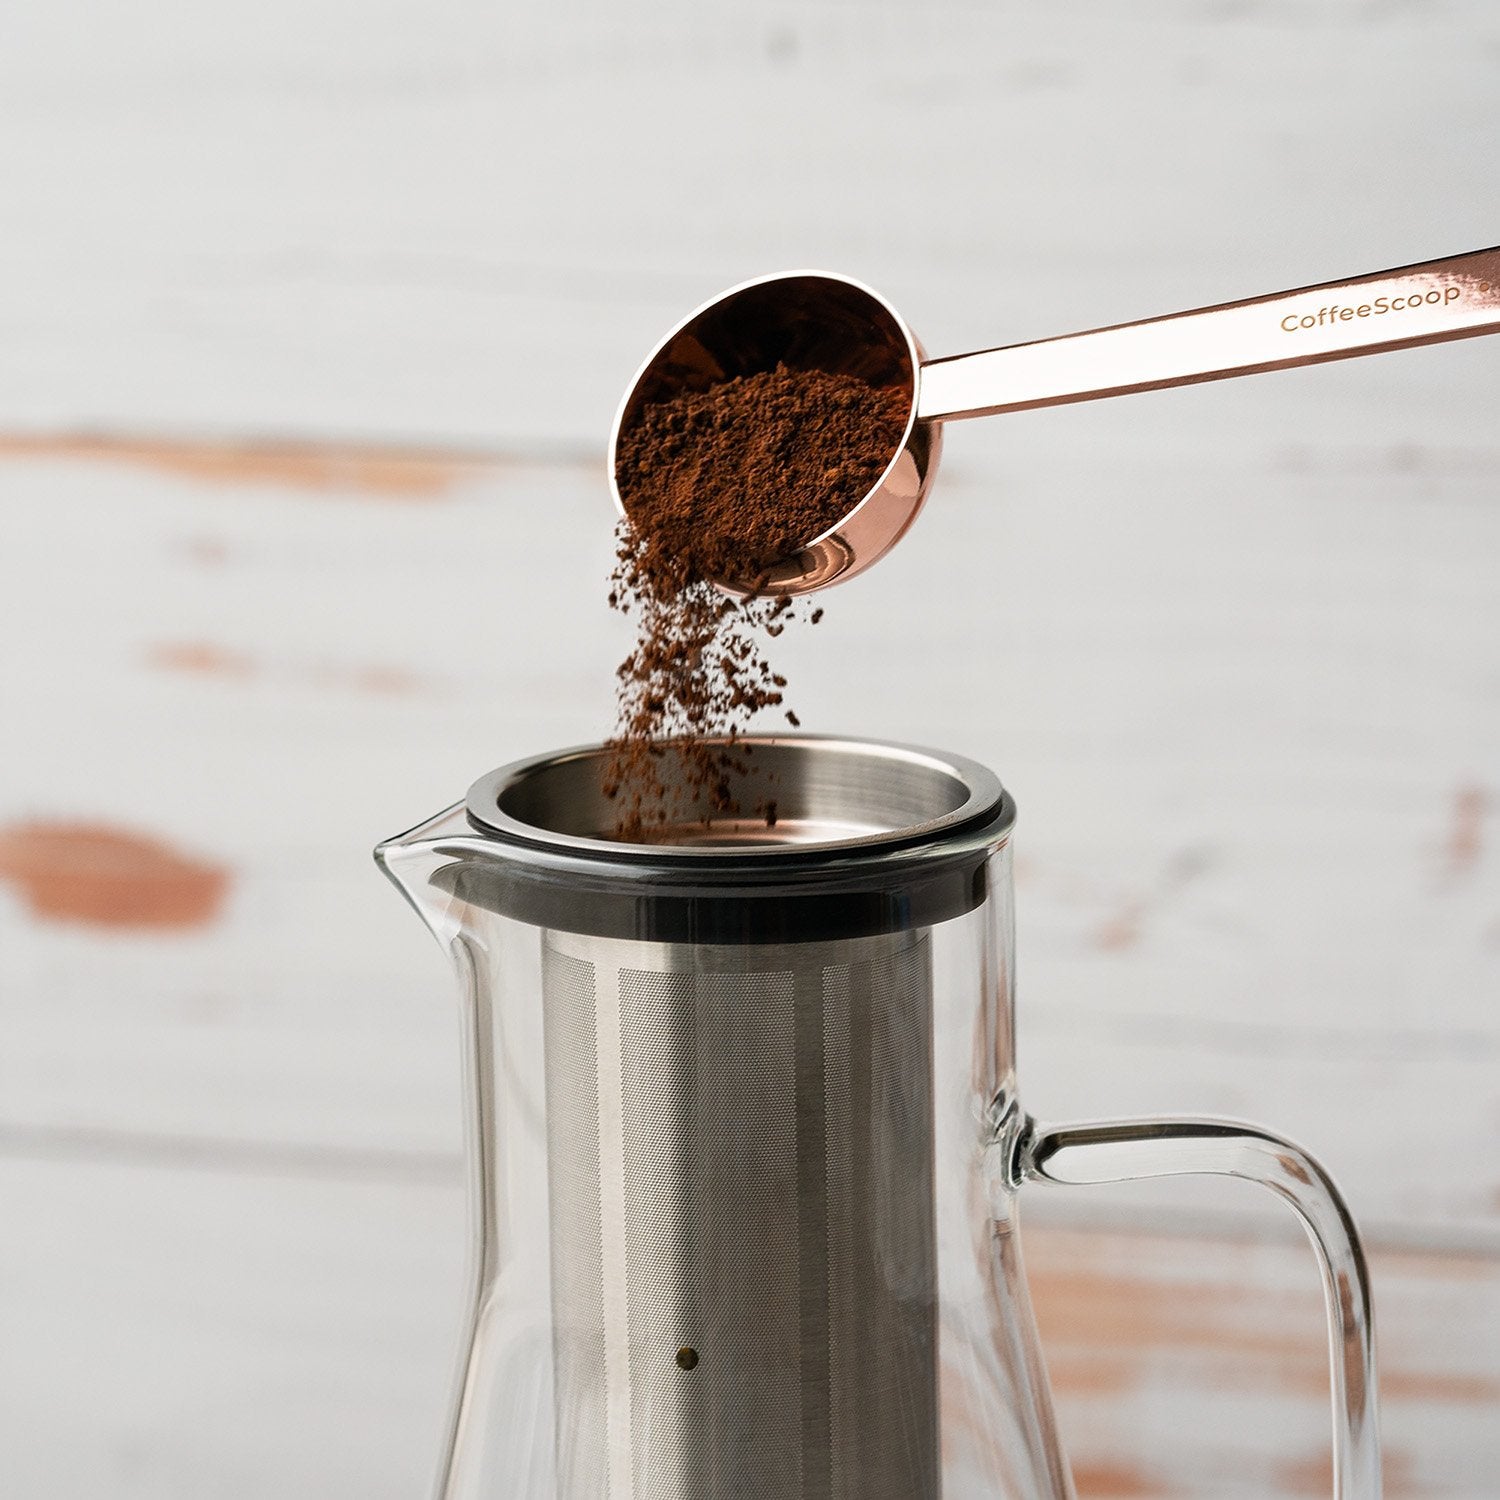 Copper colored coffee spoon pouring coffee grinds into infuser